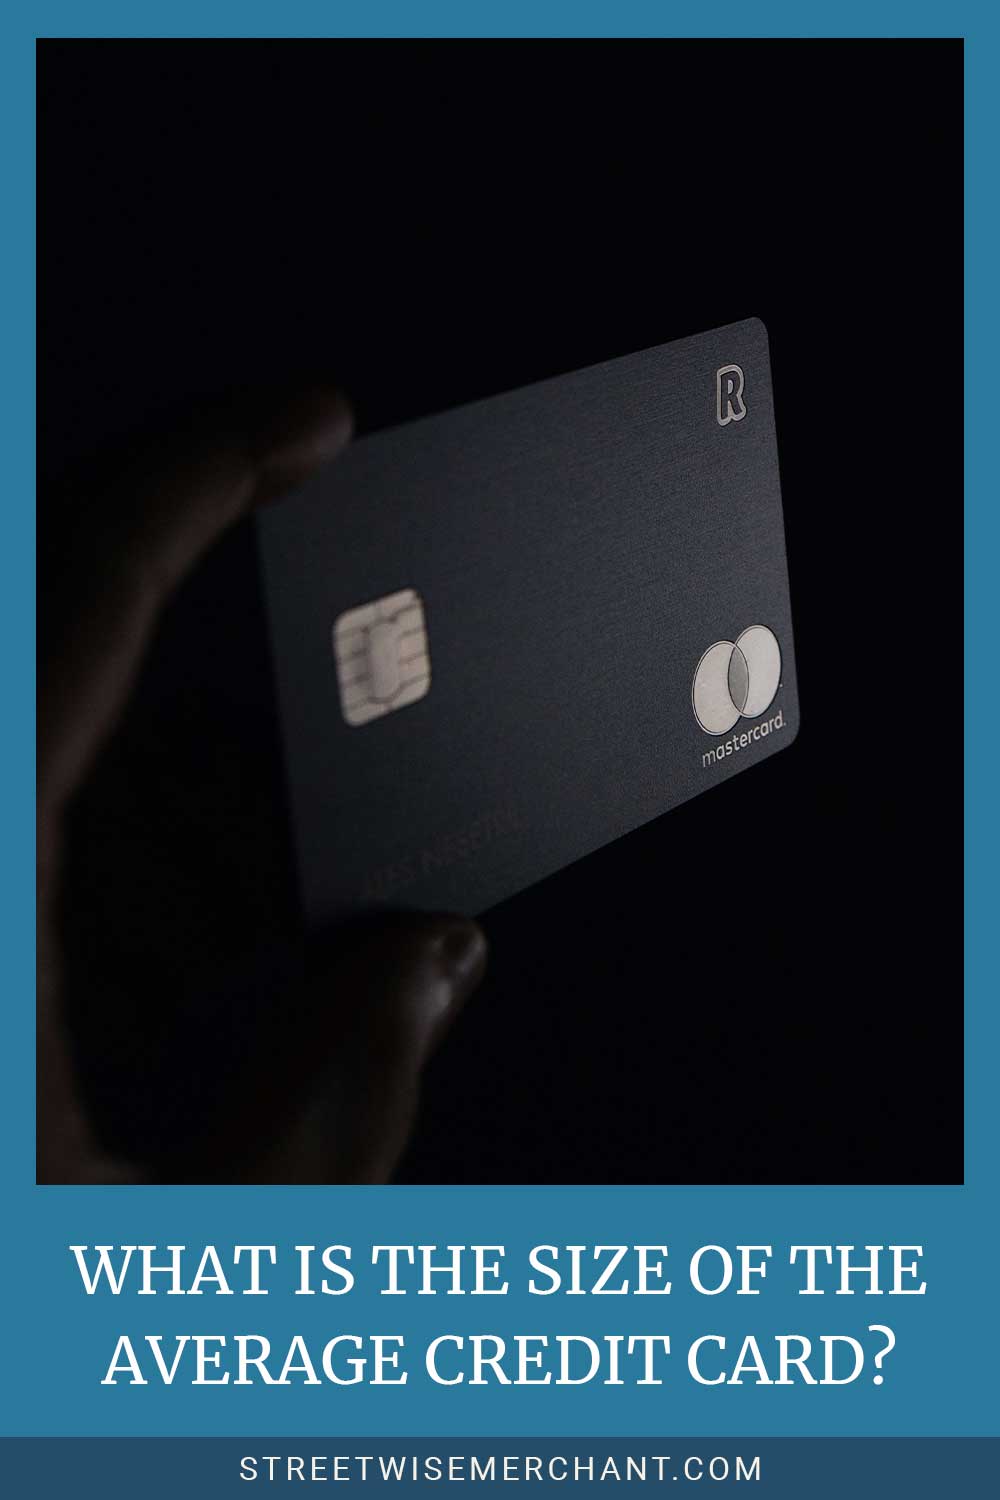 A Mastercard held by a hand - What is the Size of the Average Credit Card?